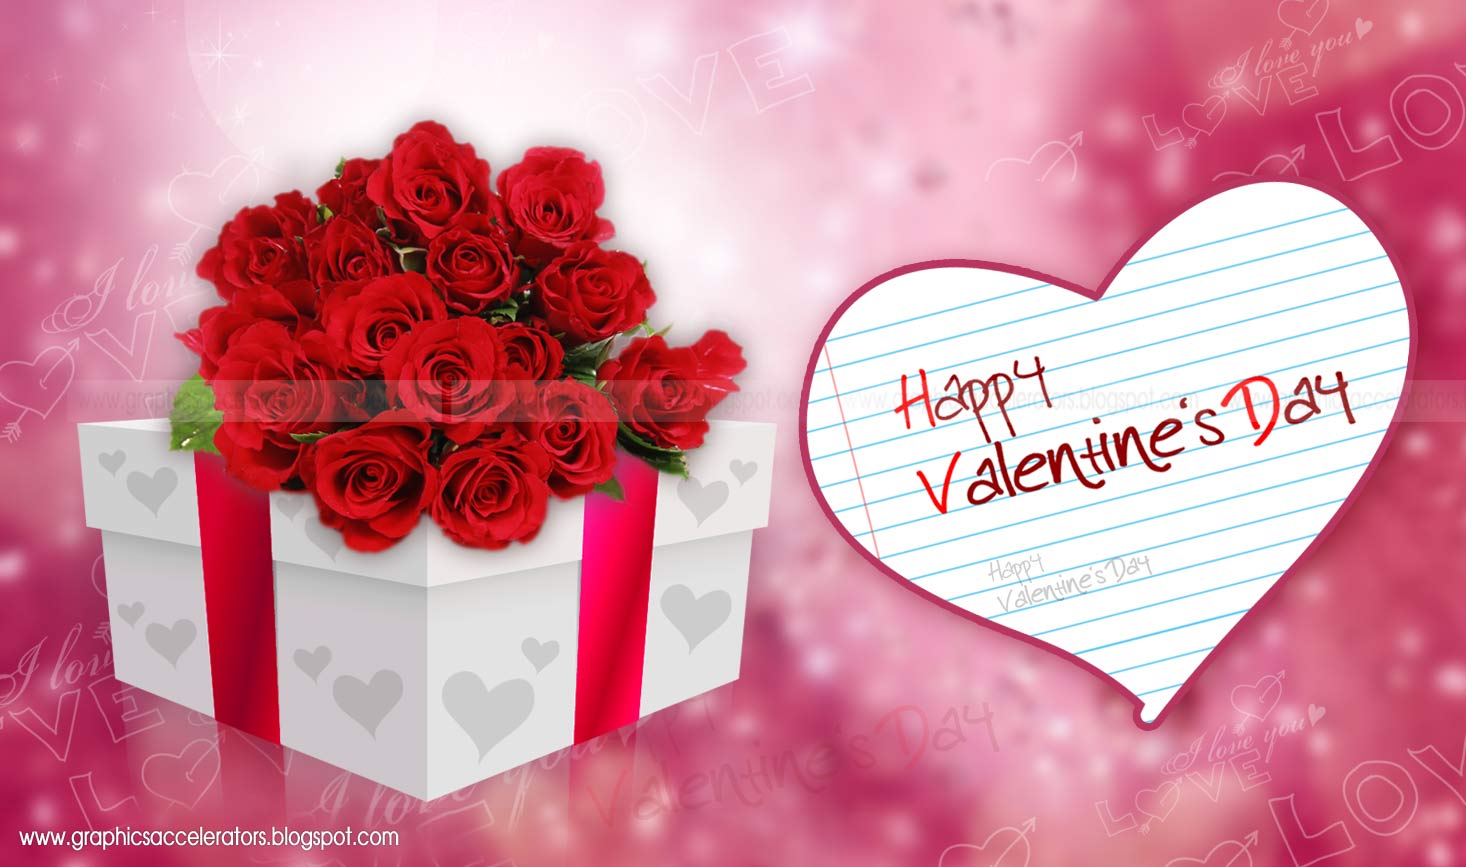 Happy Valentines Day 2015, Wallpapers, e-Greetings, Download